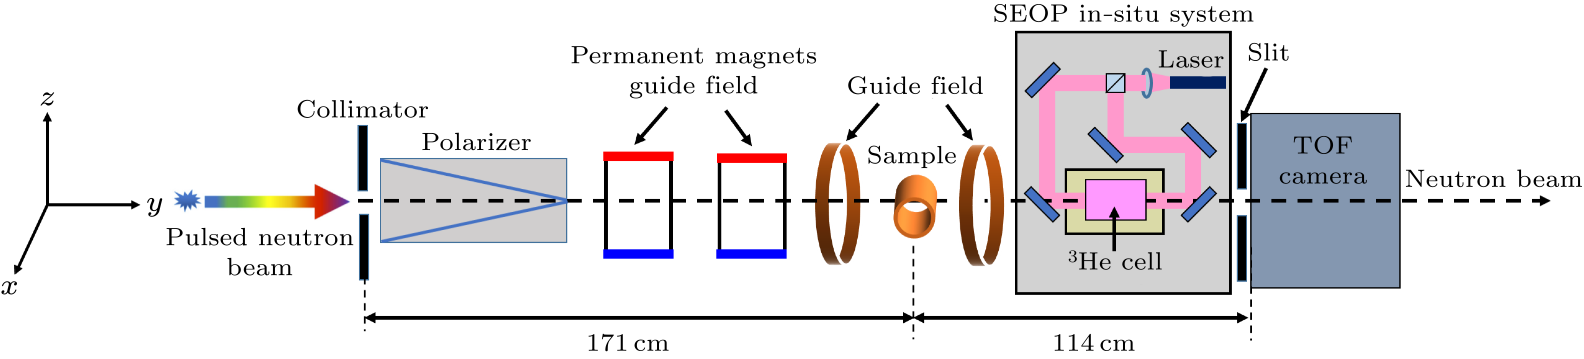 cpl-39-6-062901-fig1.png